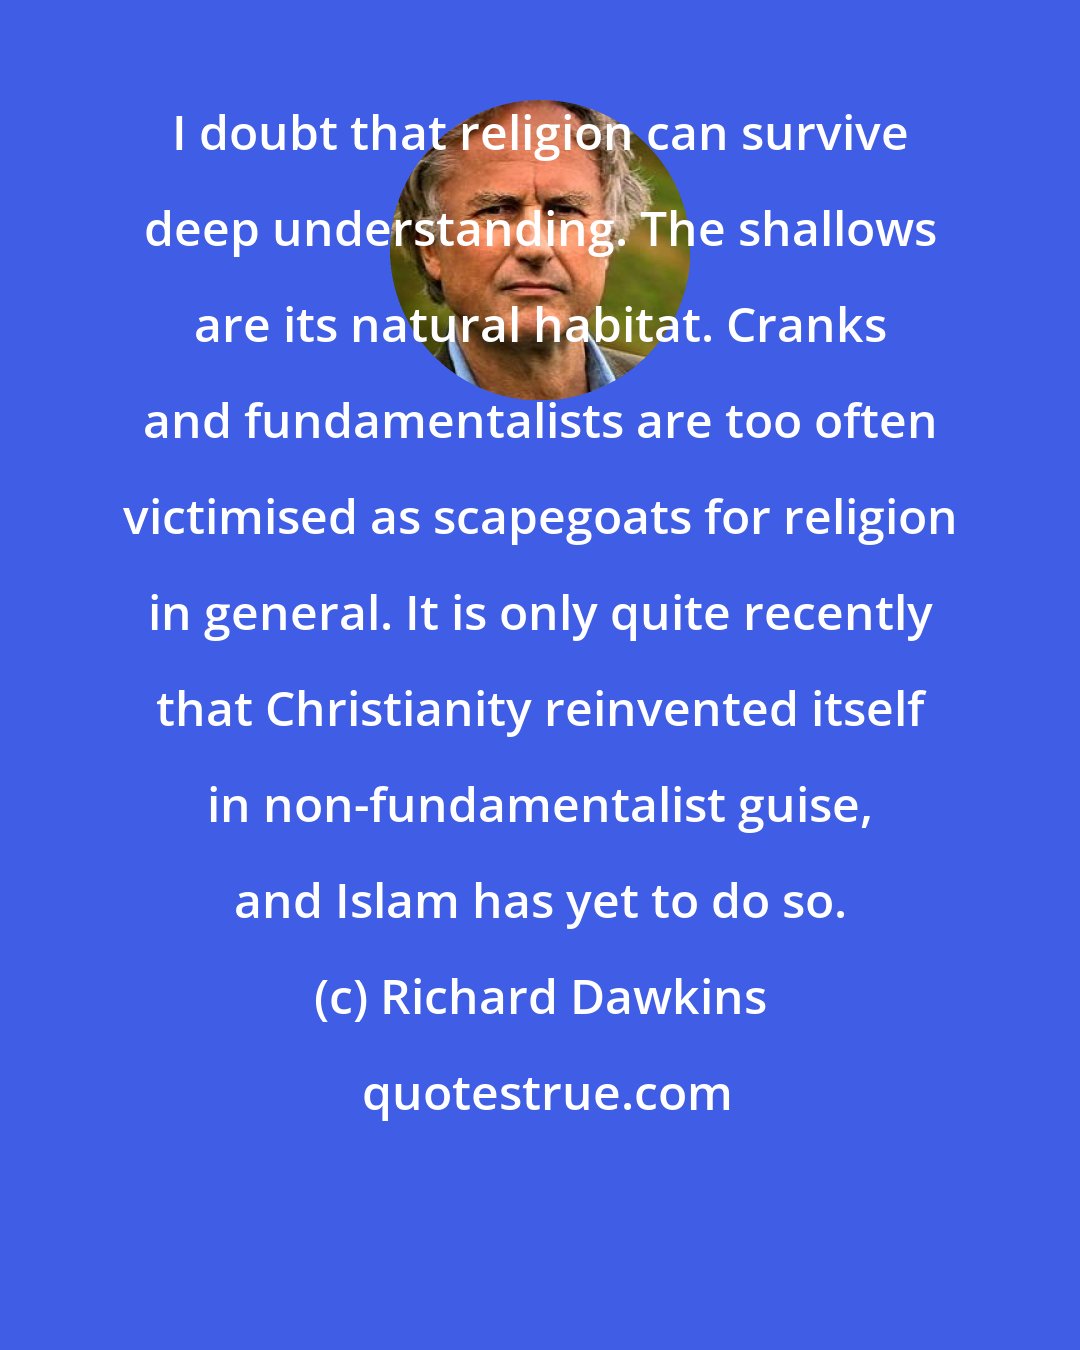 Richard Dawkins: I doubt that religion can survive deep understanding. The shallows are its natural habitat. Cranks and fundamentalists are too often victimised as scapegoats for religion in general. It is only quite recently that Christianity reinvented itself in non-fundamentalist guise, and Islam has yet to do so.